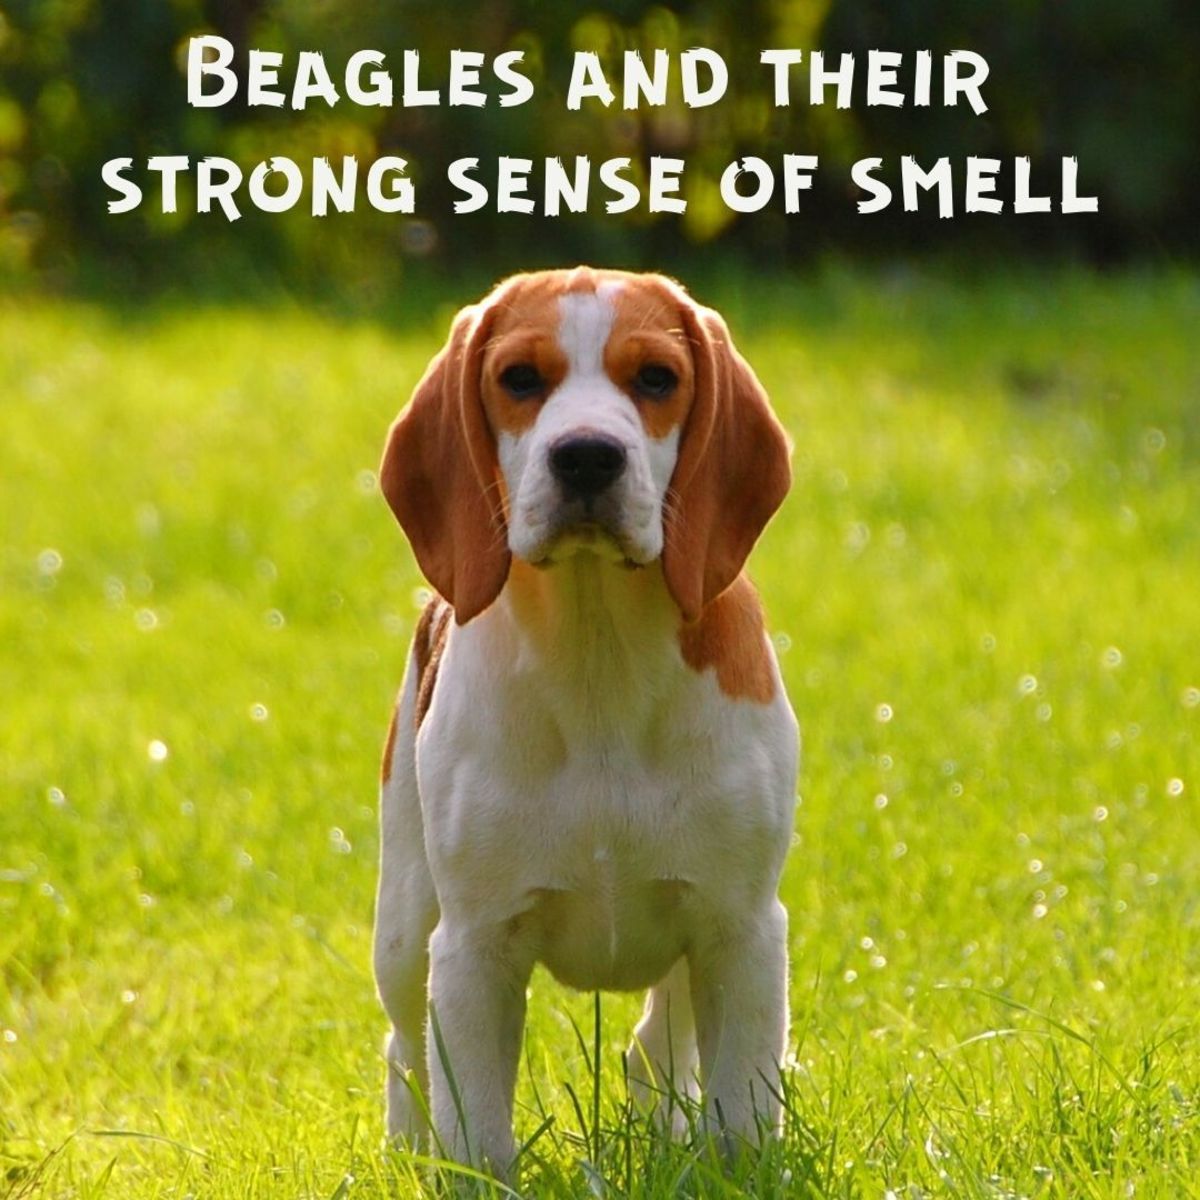 Beagles have an amazing sense of smell.